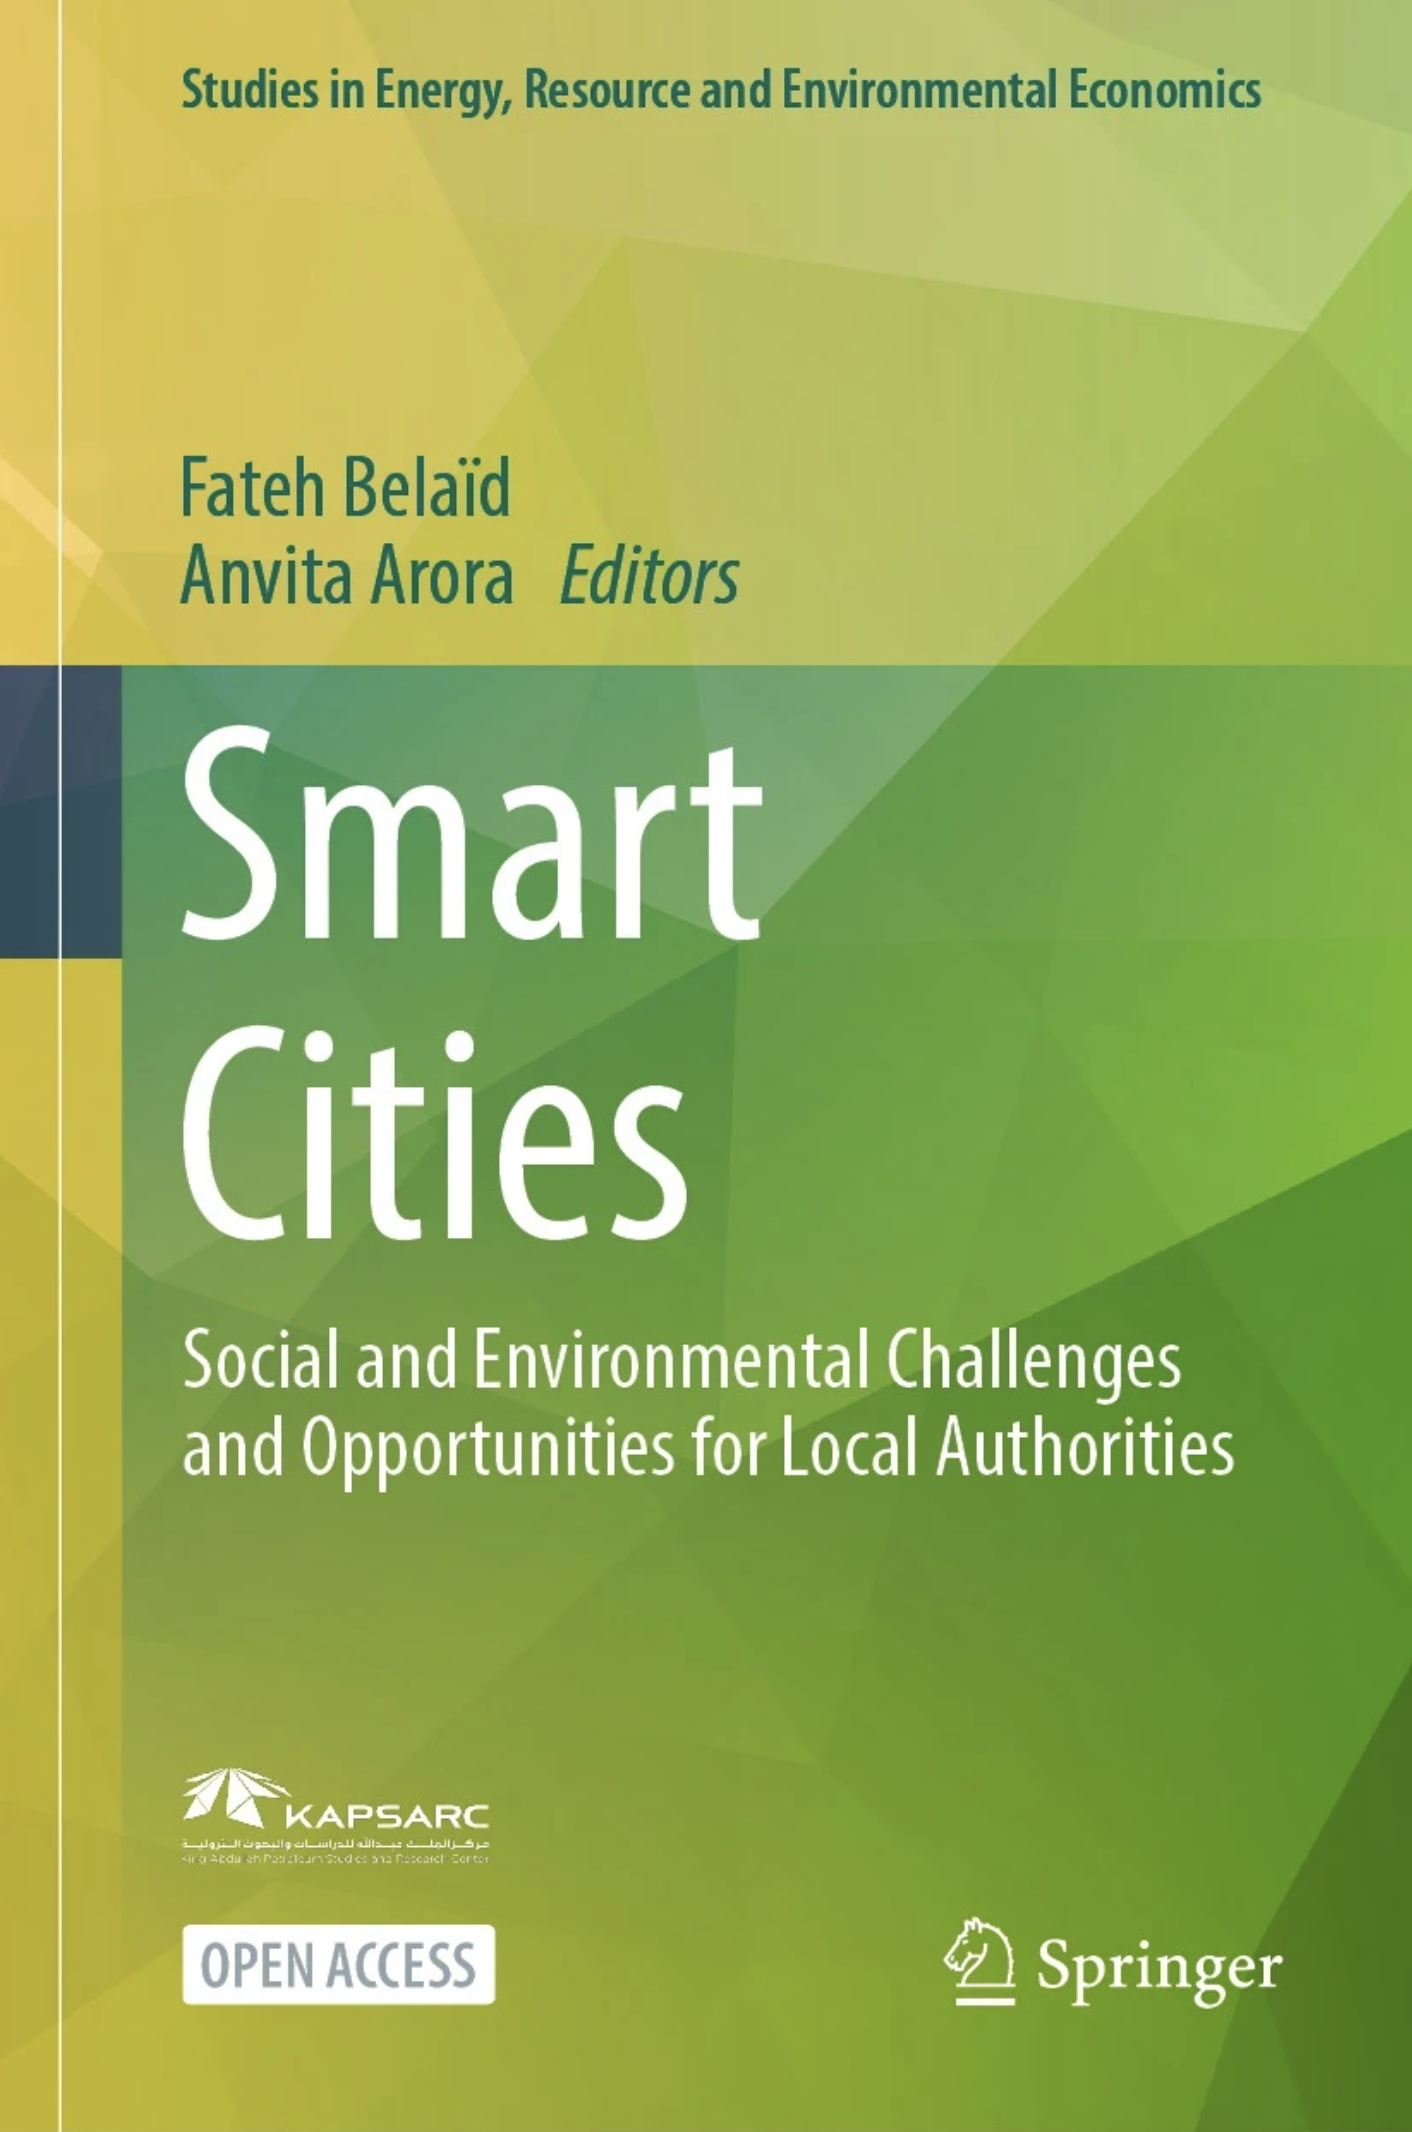 Smart Energy Cities: The Role of Behavioral Interventions in Reducing Electricity Demand in Buildings in Principality of Monaco